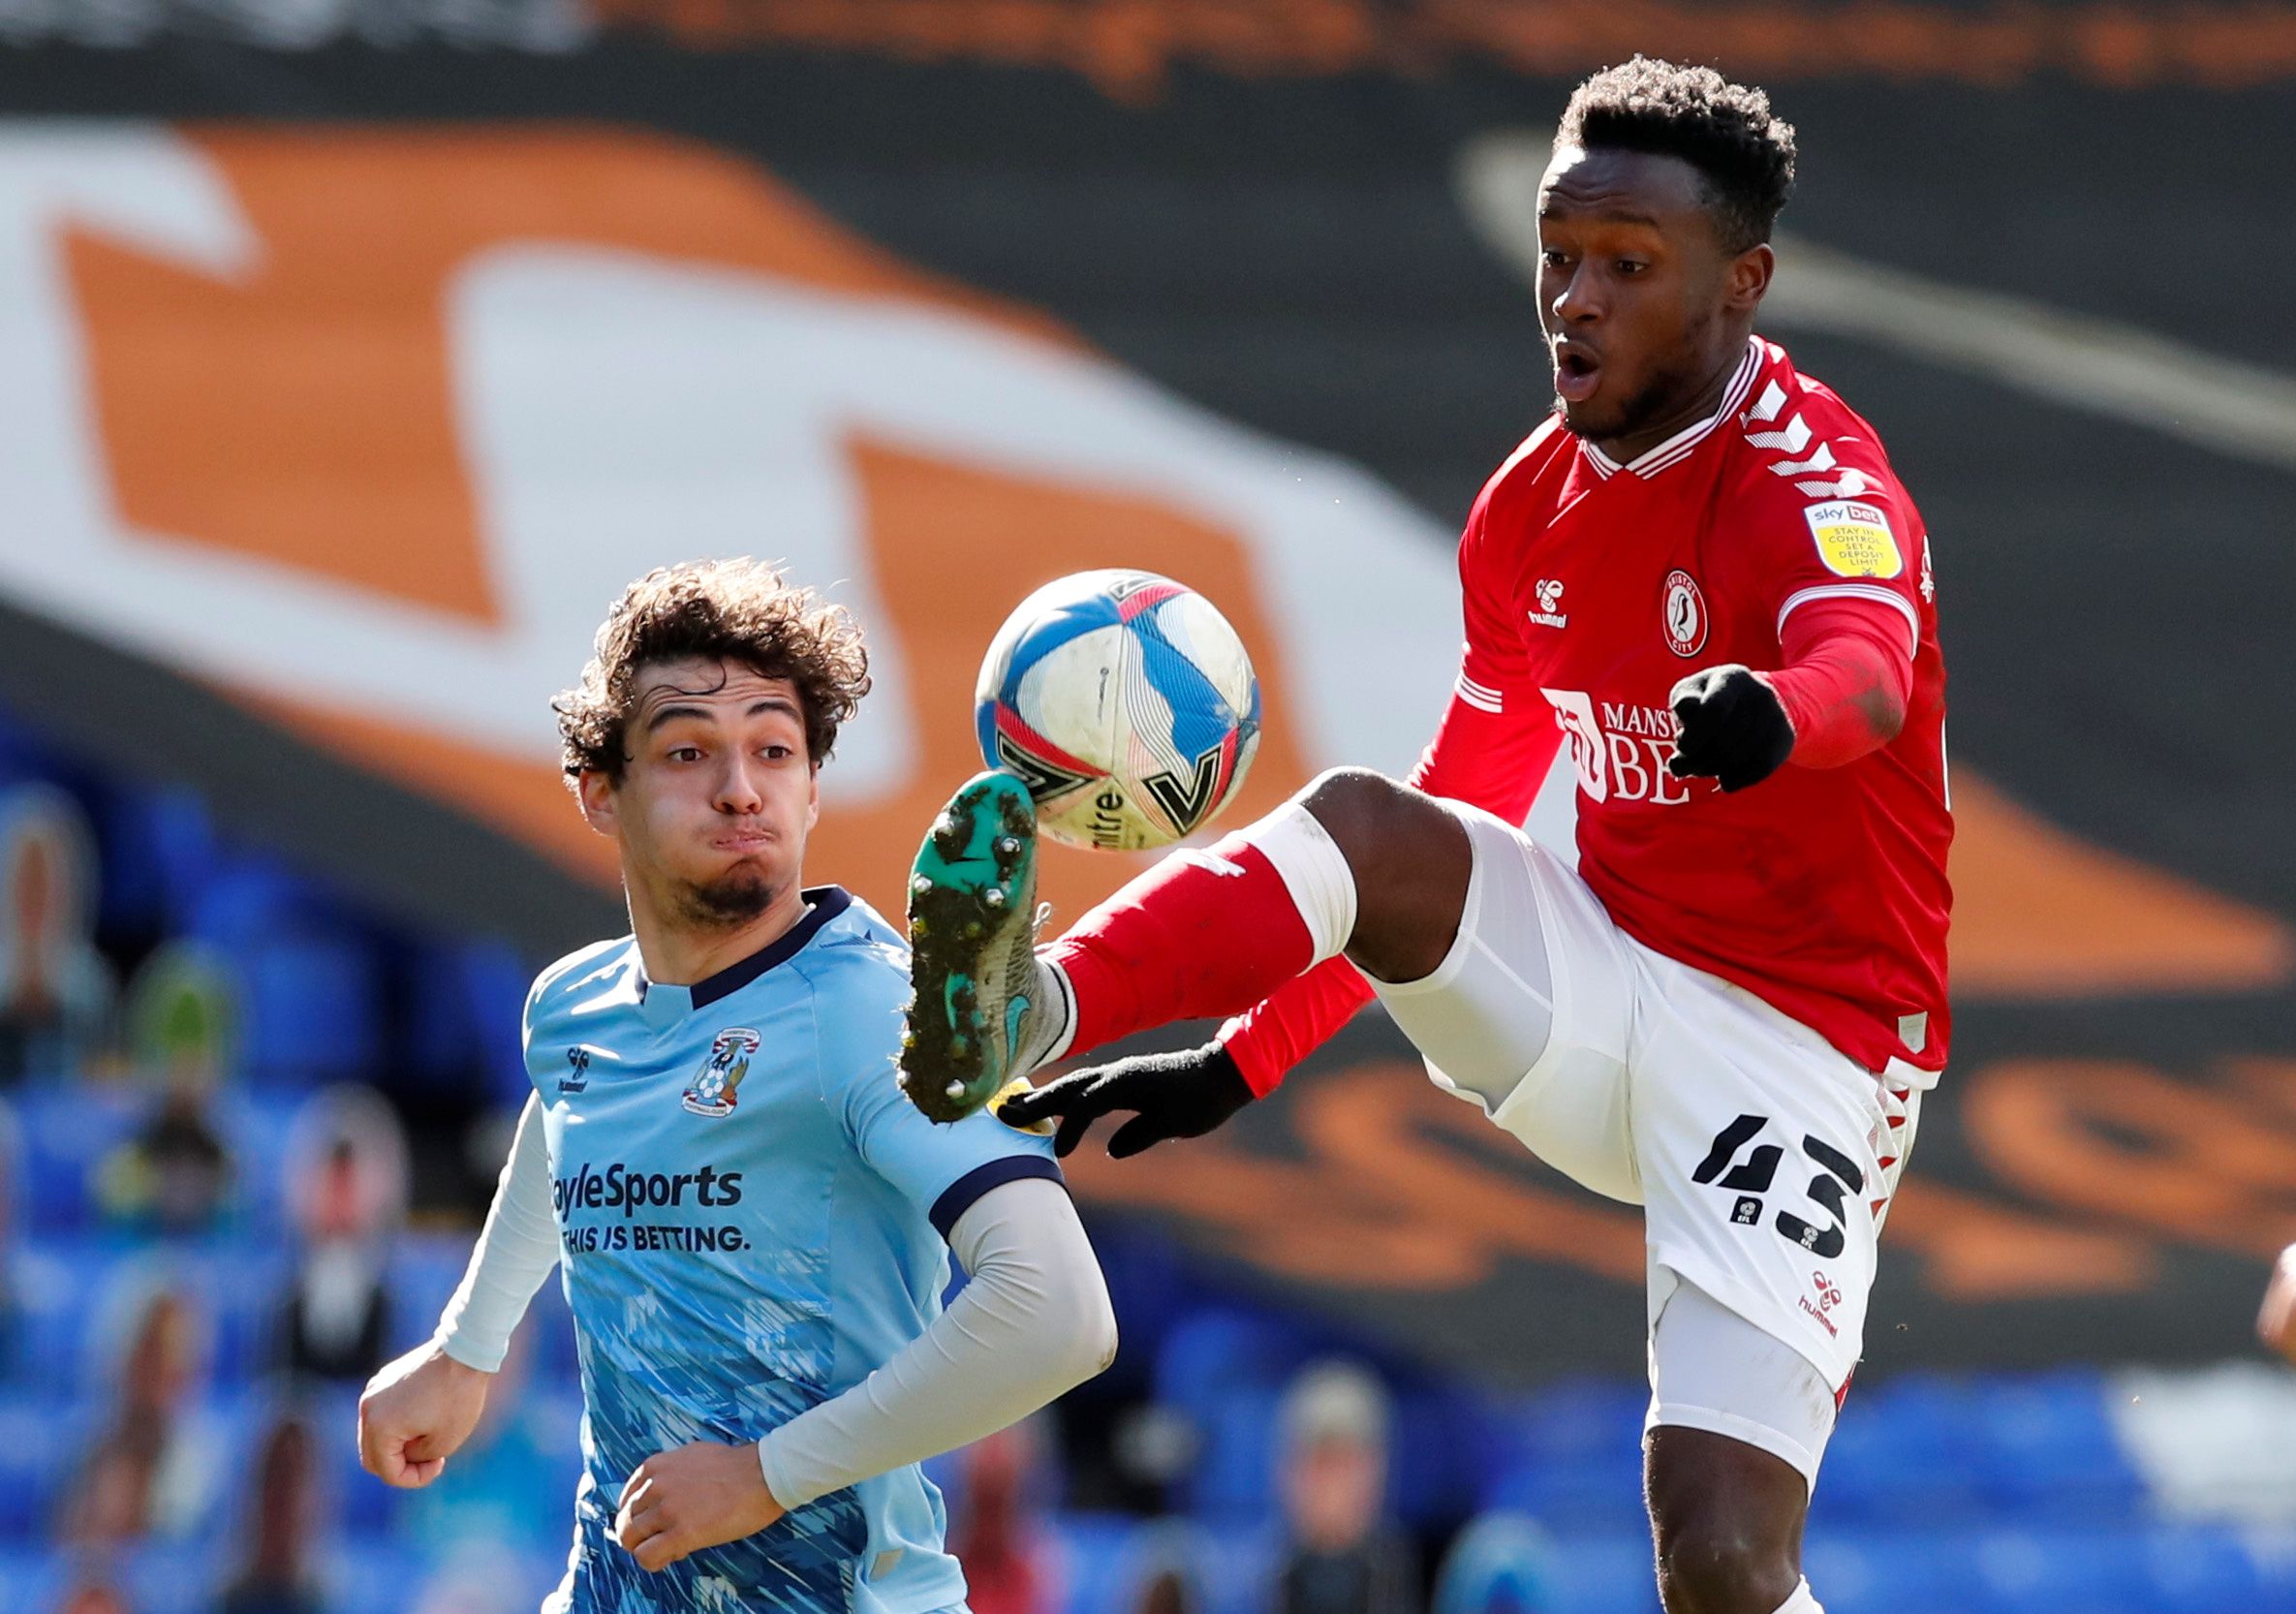 Soccer Football - Championship - Coventry City v Bristol City - St Andrew's, Birmingham, Britain - April 5, 2021  Bristol City's Steven Sessegnon in action with Coventry City's Tyler Walker  Action Images/Andrew Boyers  EDITORIAL USE ONLY. No use with unauthorized audio, video, data, fixture lists, club/league logos or "live" services. Online in-match use limited to 75 images, no video emulation. No use in betting, games or single club/league/player publications.  Please contact your account rep